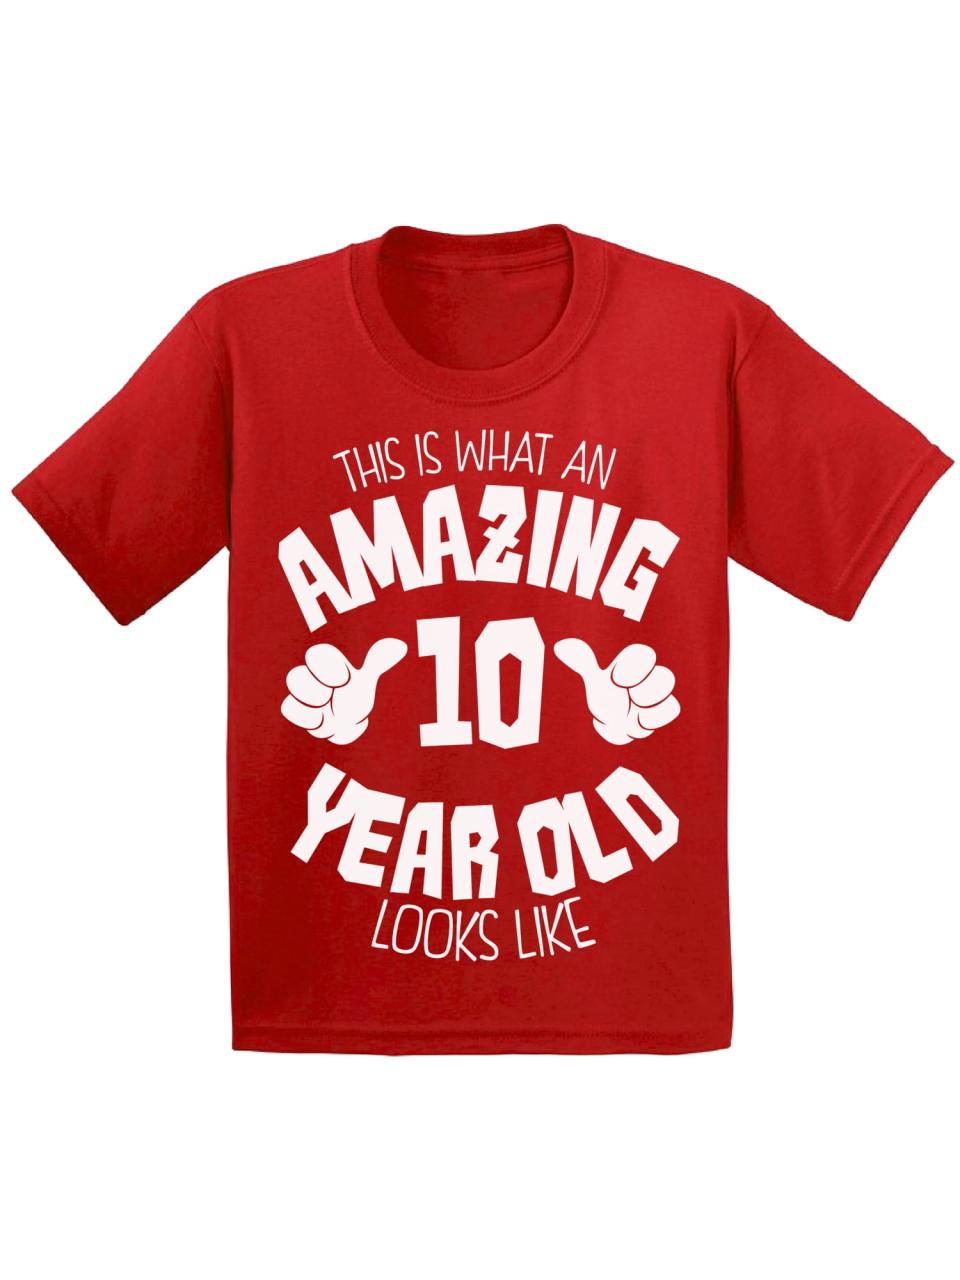 10 Year Old T Shirt Size